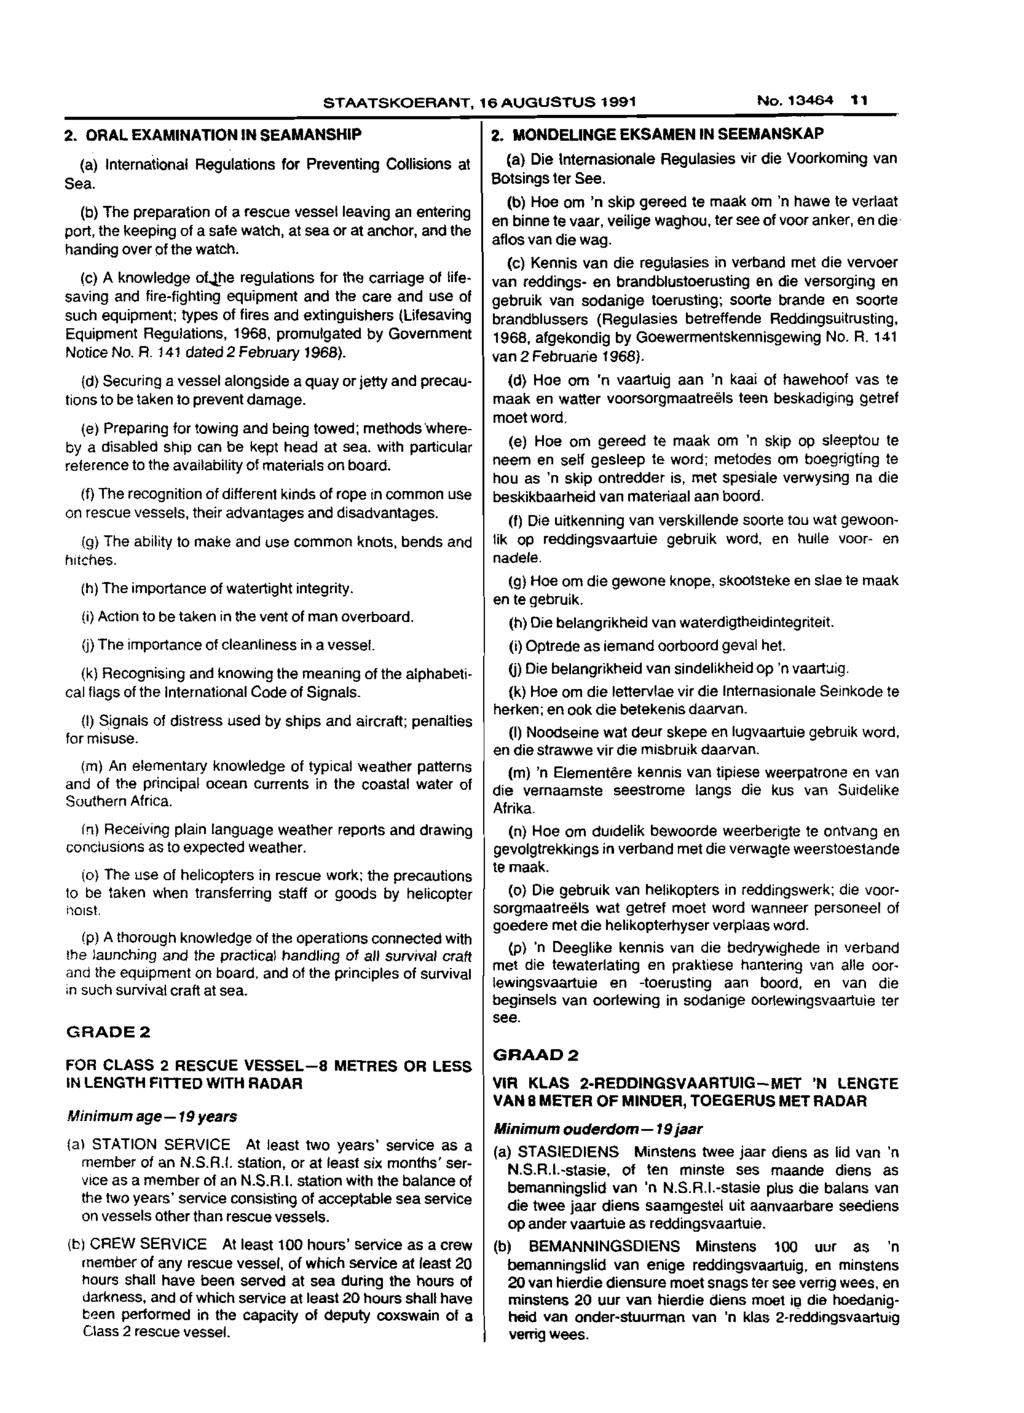 staatskoerant, 16 AUGUSTUS 1991 No.13464 11 2. ORAL EXAMINATION IN SEAMANSHIP (a) International Regulations for Preventing Collisions at Sea.